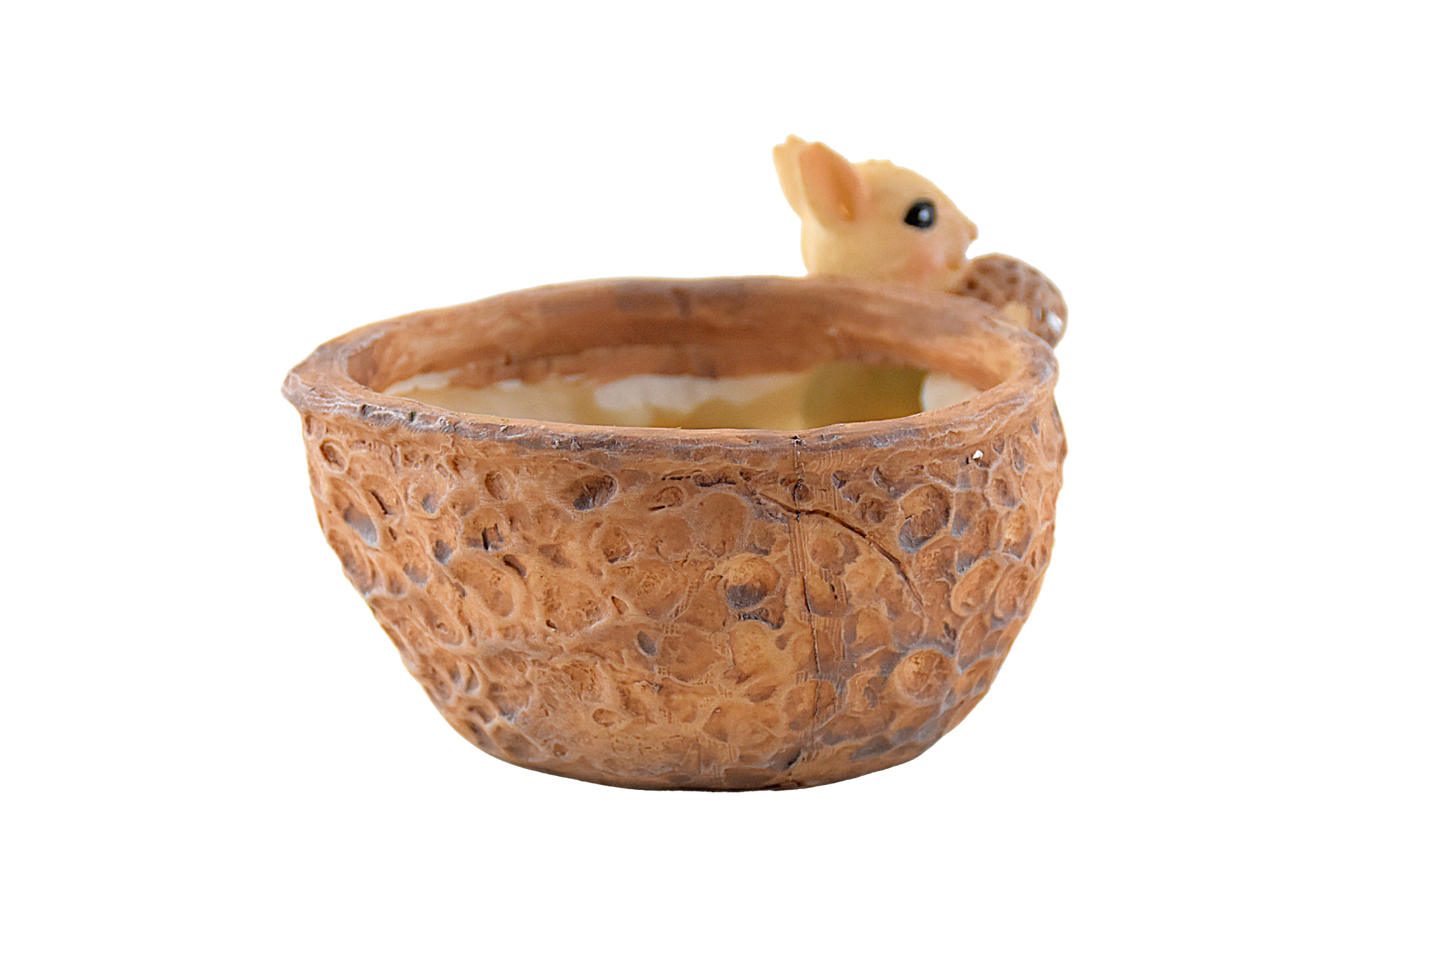 Squirrel Eating Walnut Resin Pot for Succulents - Deczo